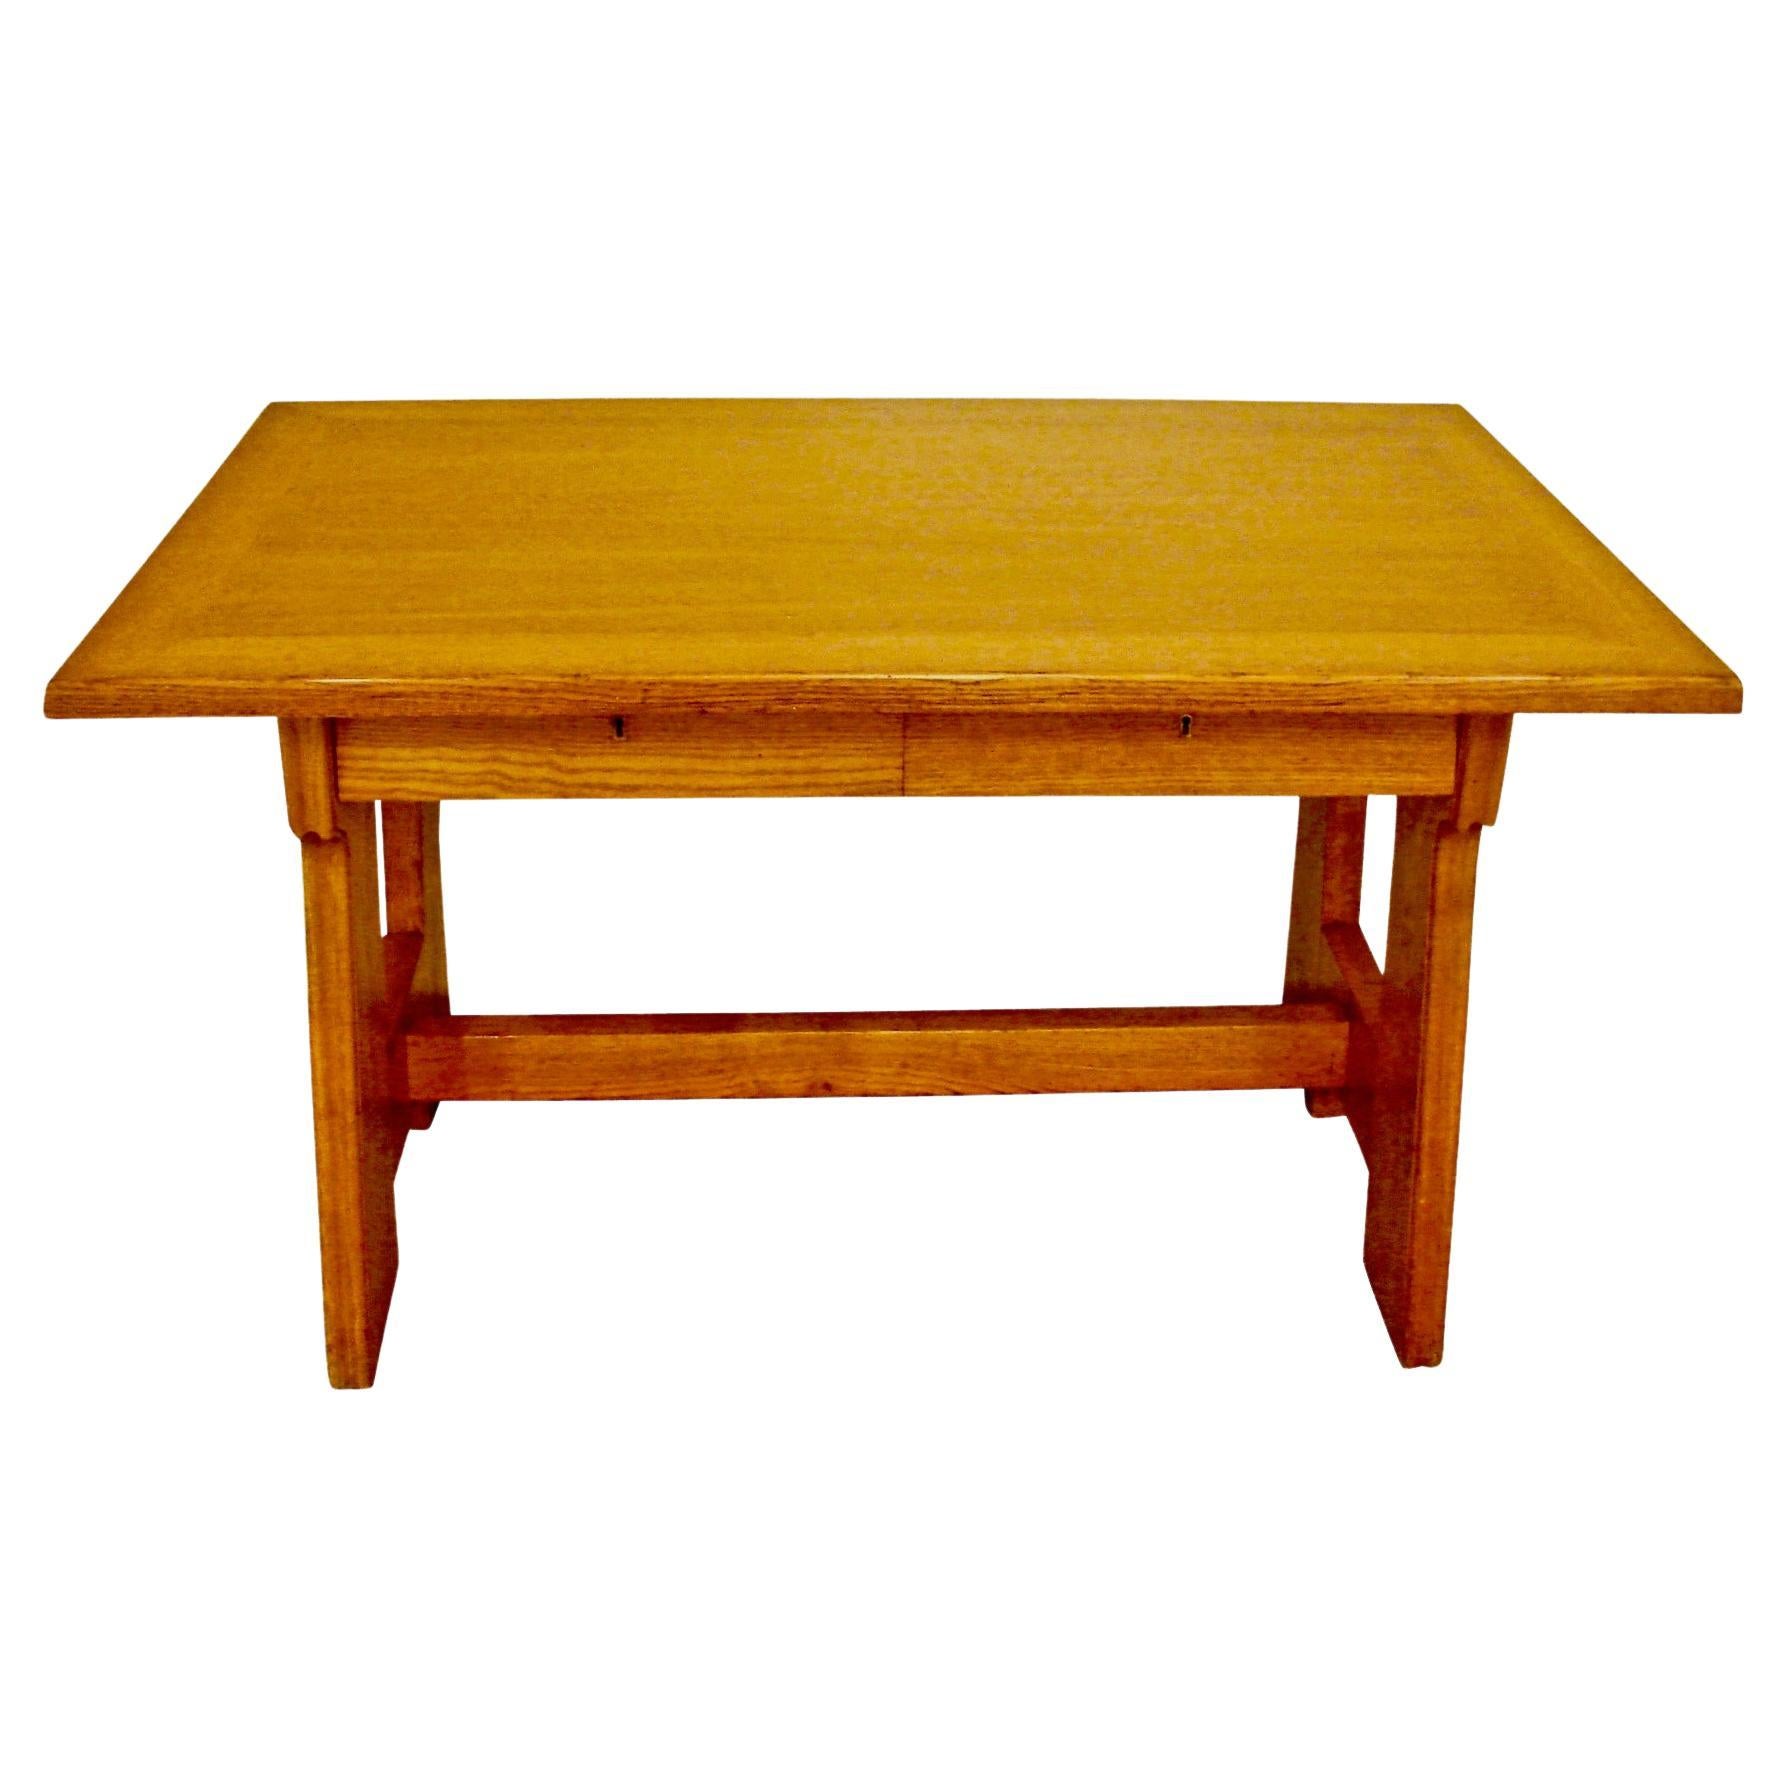 Continental Oak Arts & Crafts Period Table with 2 Drawers For Sale